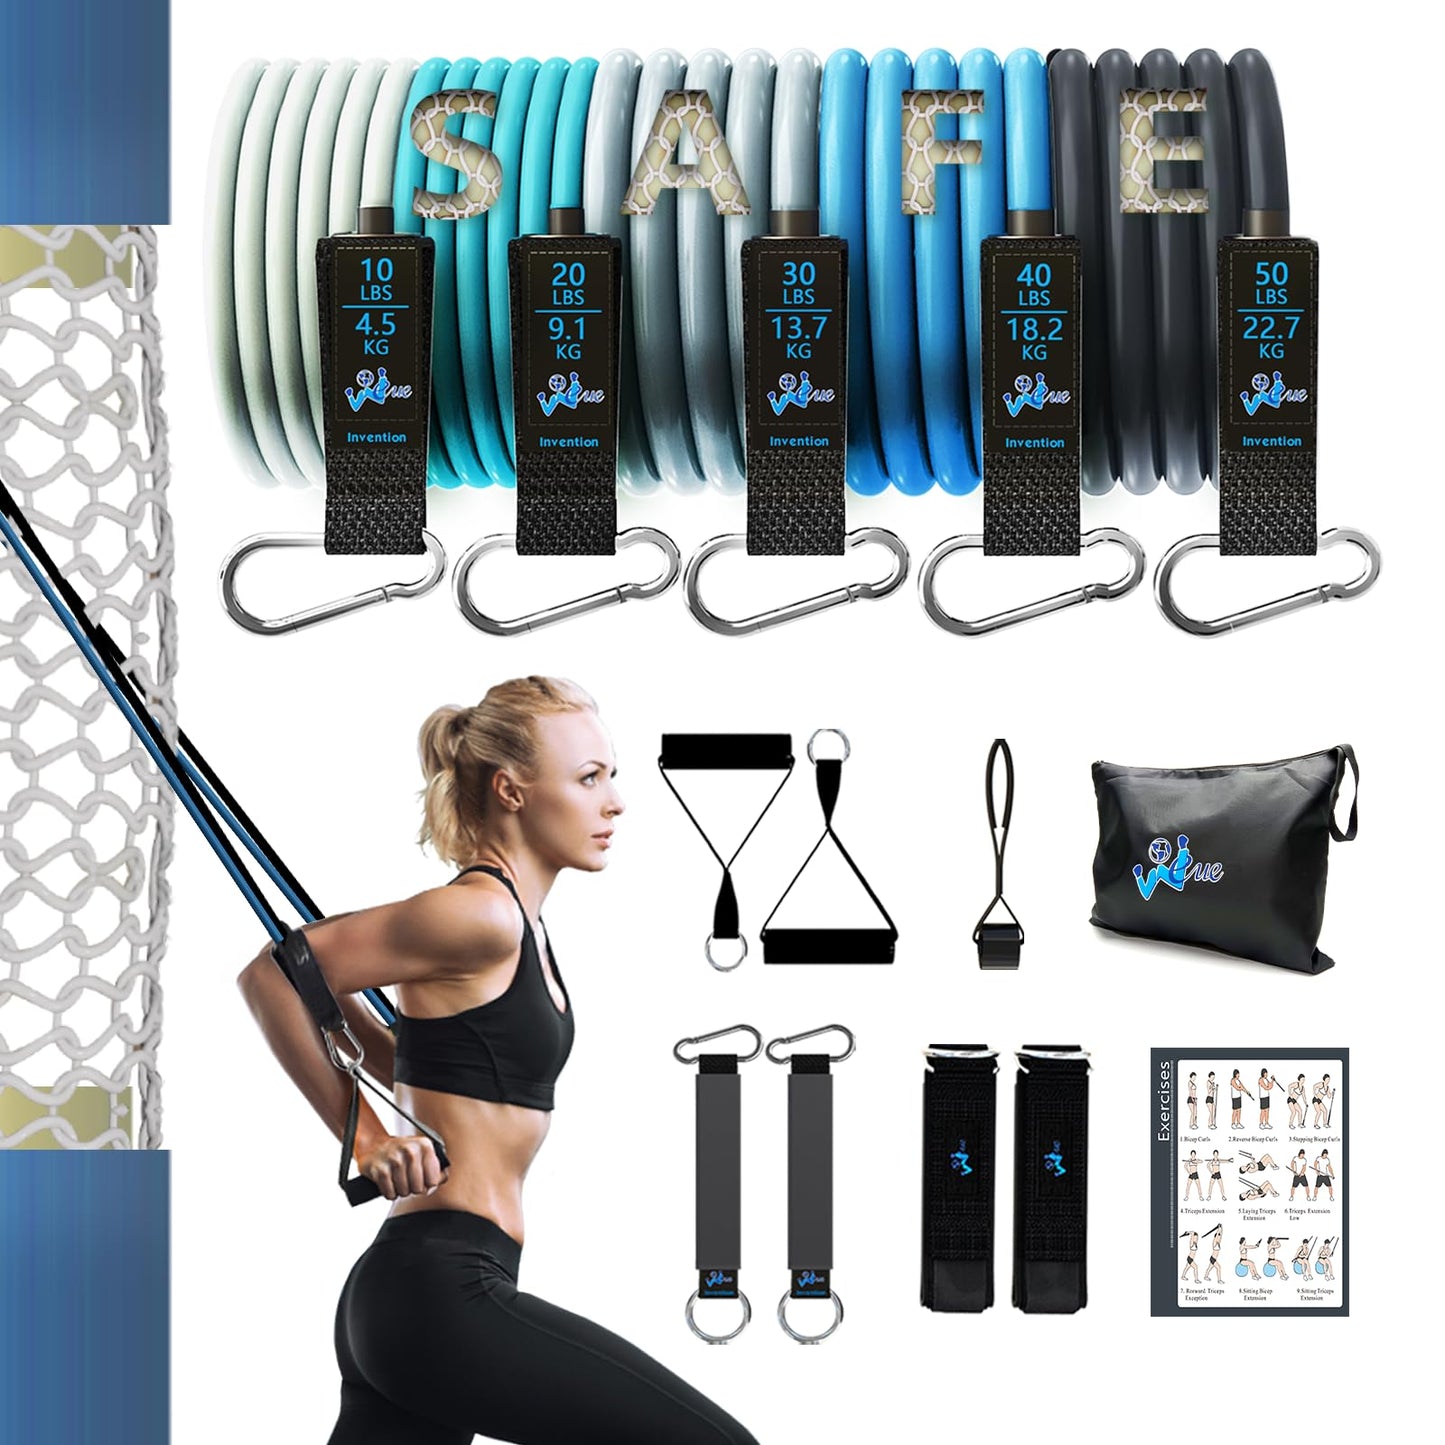 WEUE Resistance Band Safety Tube INVENTION Exercise Band for Fitness Workout Band with Handles for Men Women, Up to 150lbs with Foam Handles, Ankle Straps, Door Anchor for Gym and Home